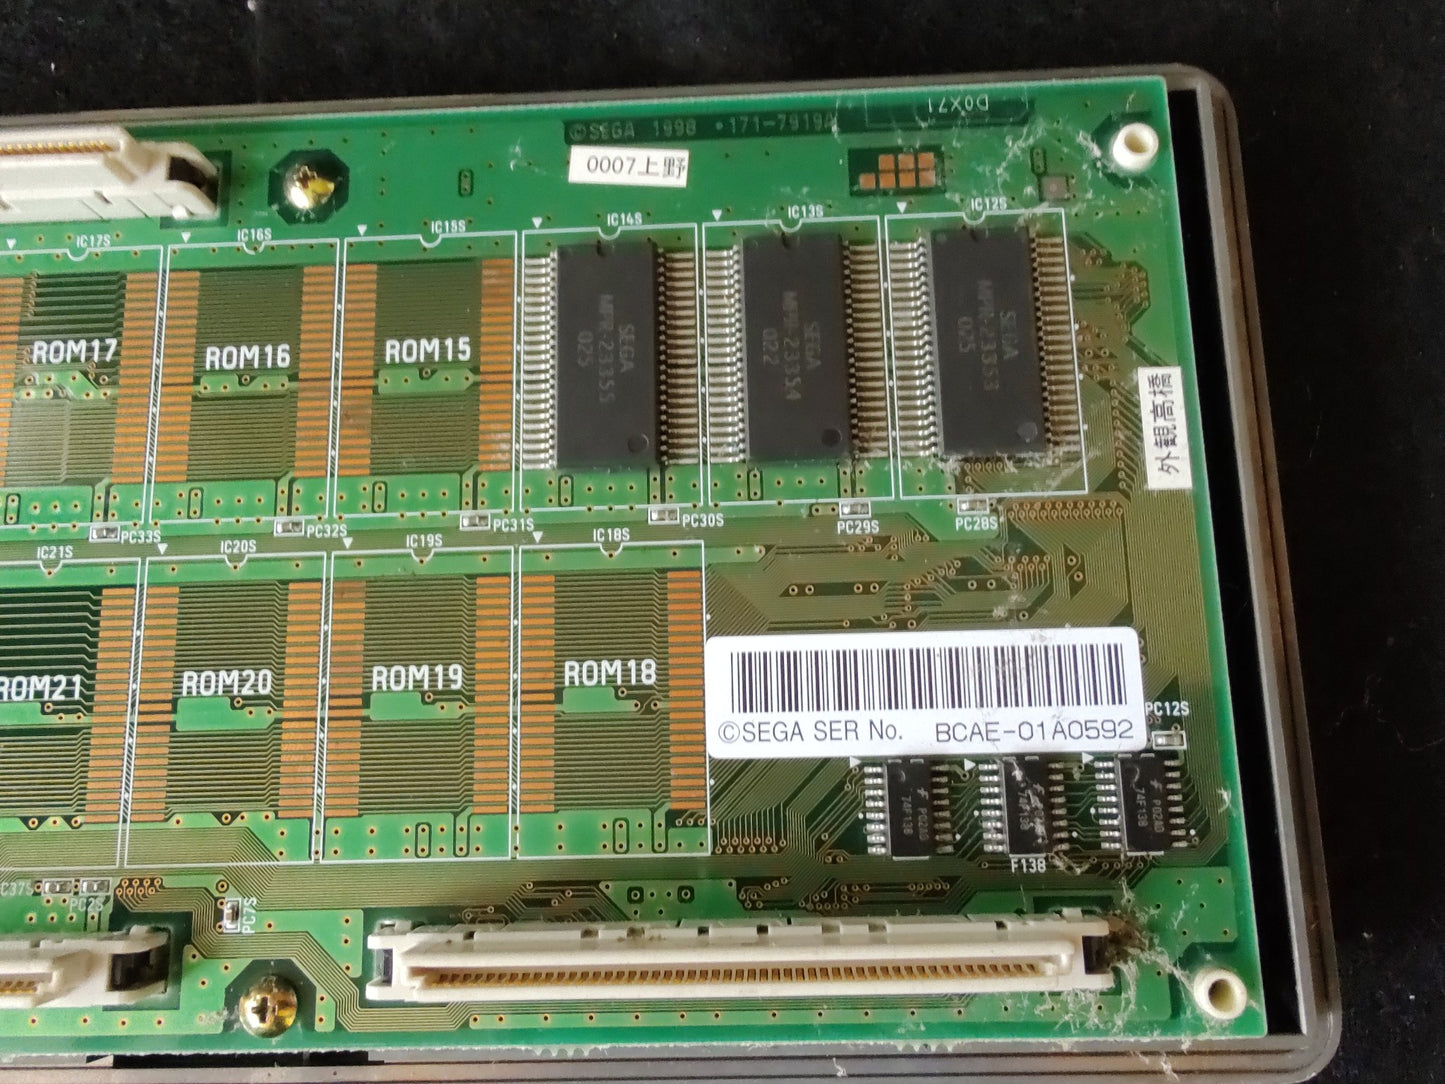 Guilty Gear X NAOMI PCB System Cartridge,Instruction Card set, Working-f0915-